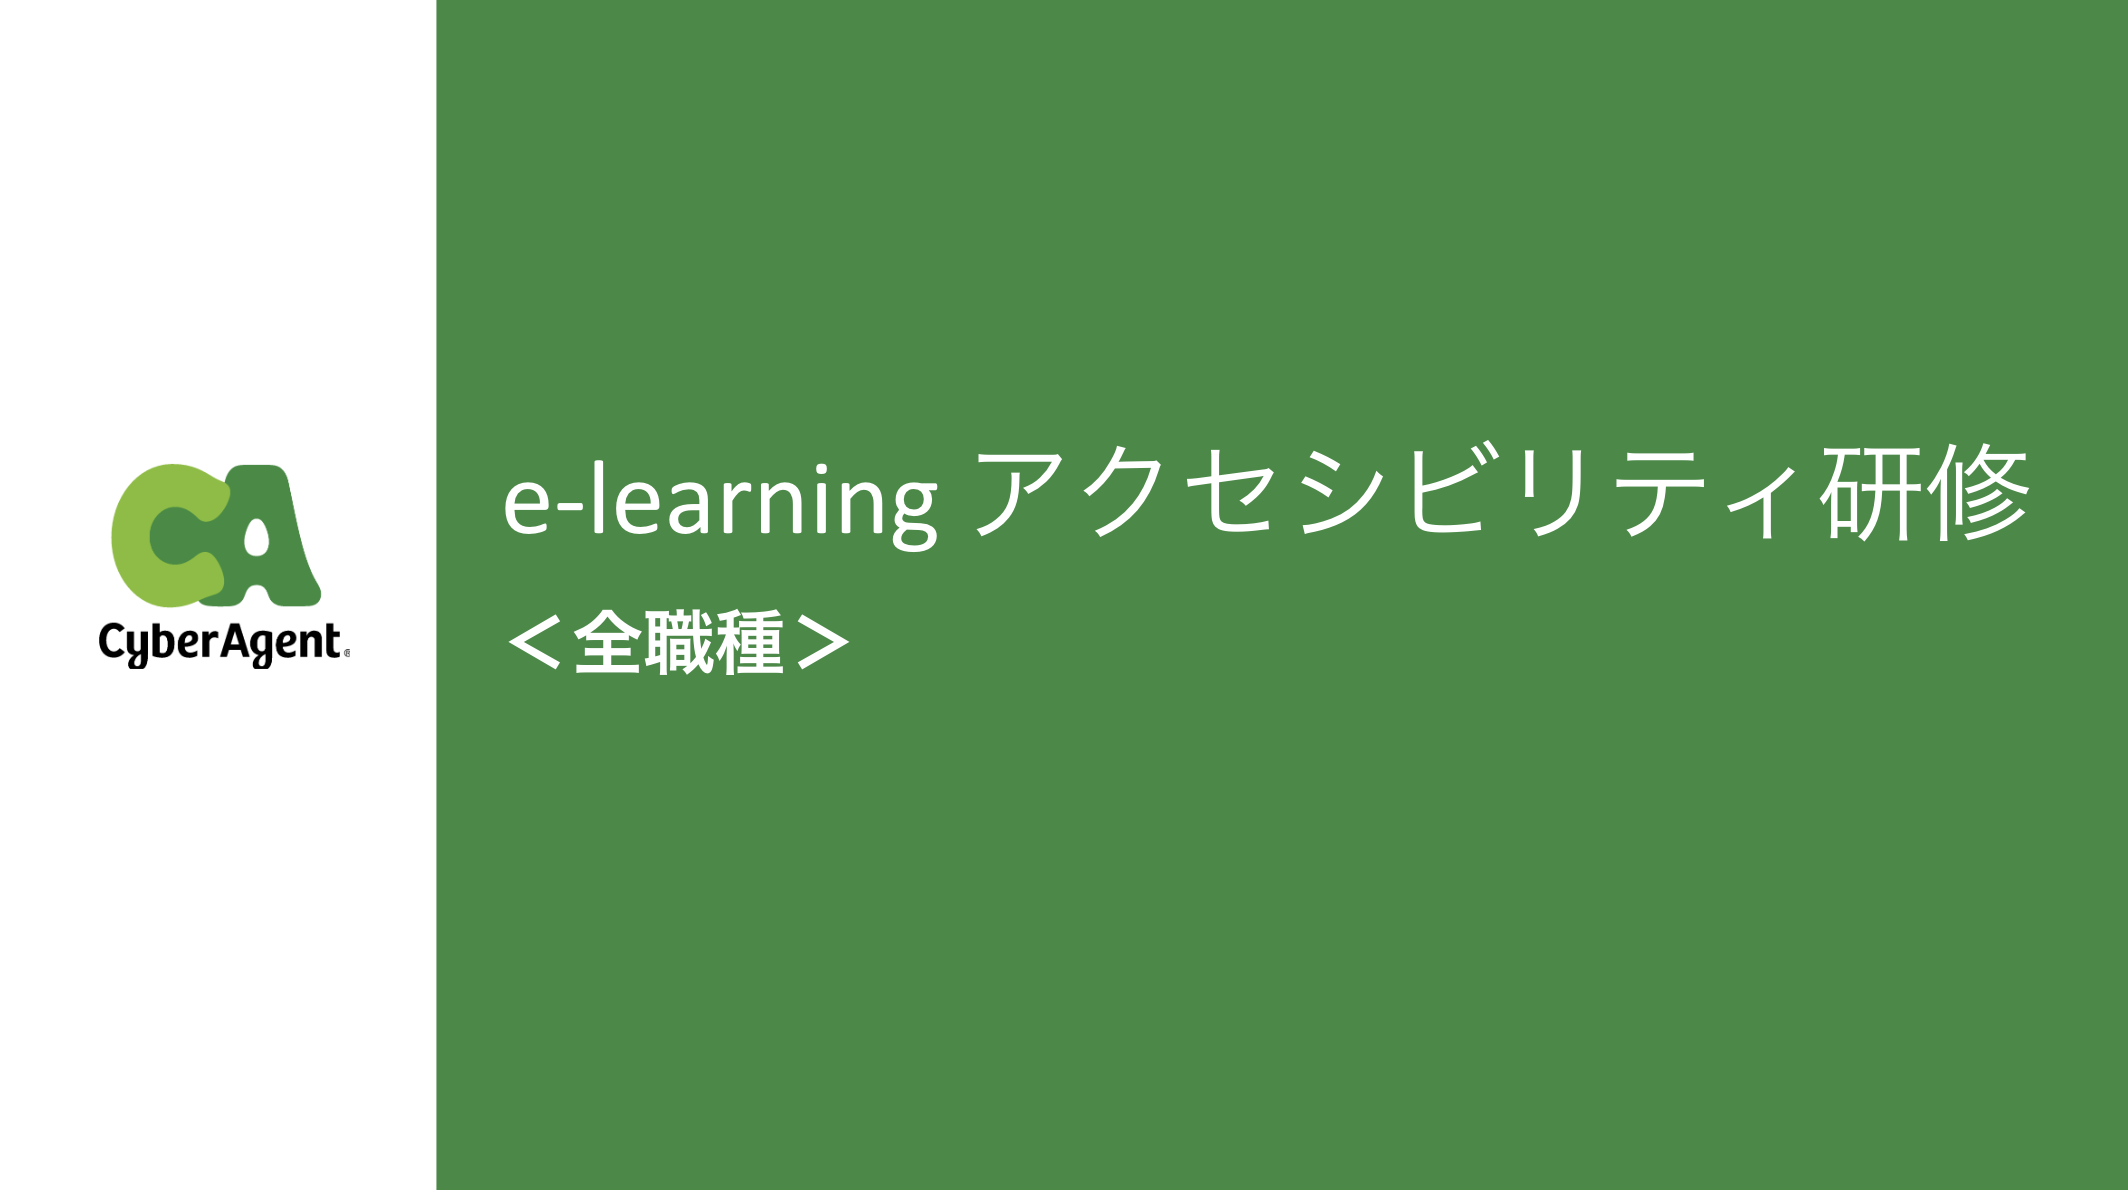 e-learning アクセシビリティ研修 全職種